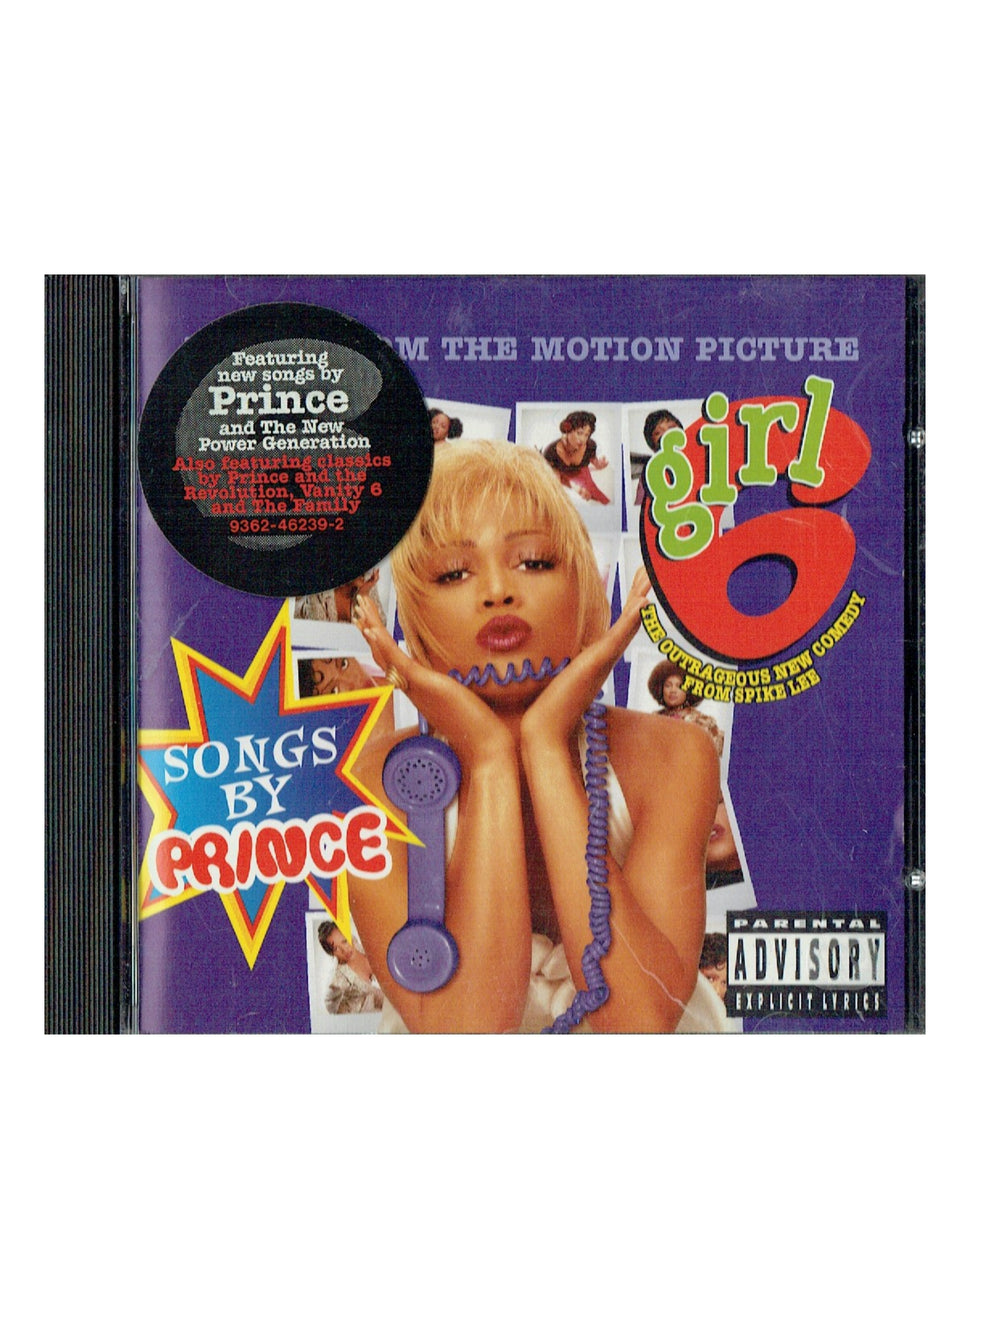 Girl 6 Soundtrack Songs By Prince CD Album EU Release GREAT TRACKS HYPE STICKER